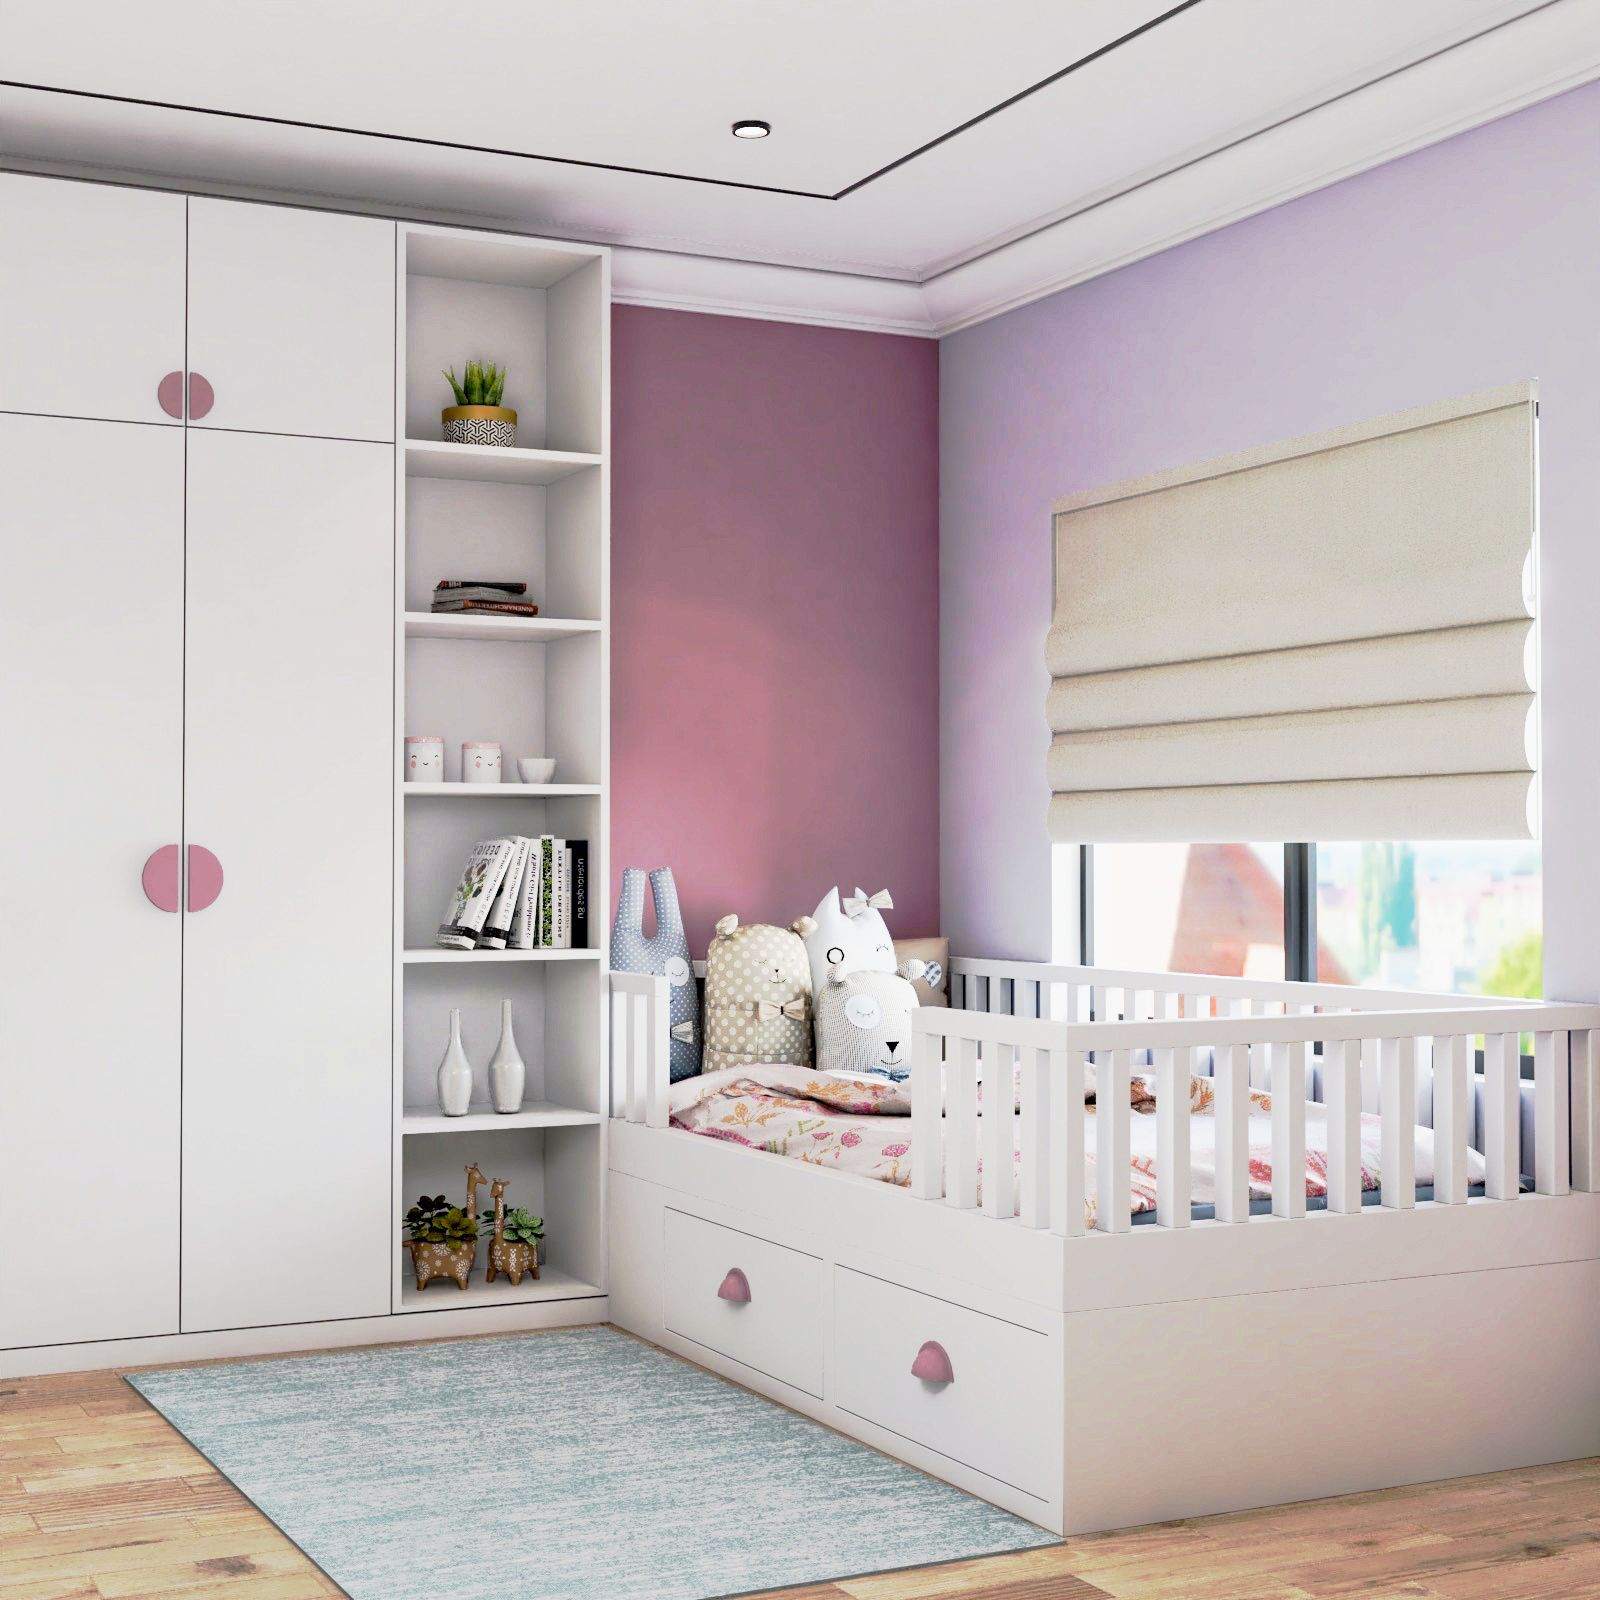 Minimalistic Pink And Lavender Girls Room Design With 2-Door White And Pink Swing Wardrobe